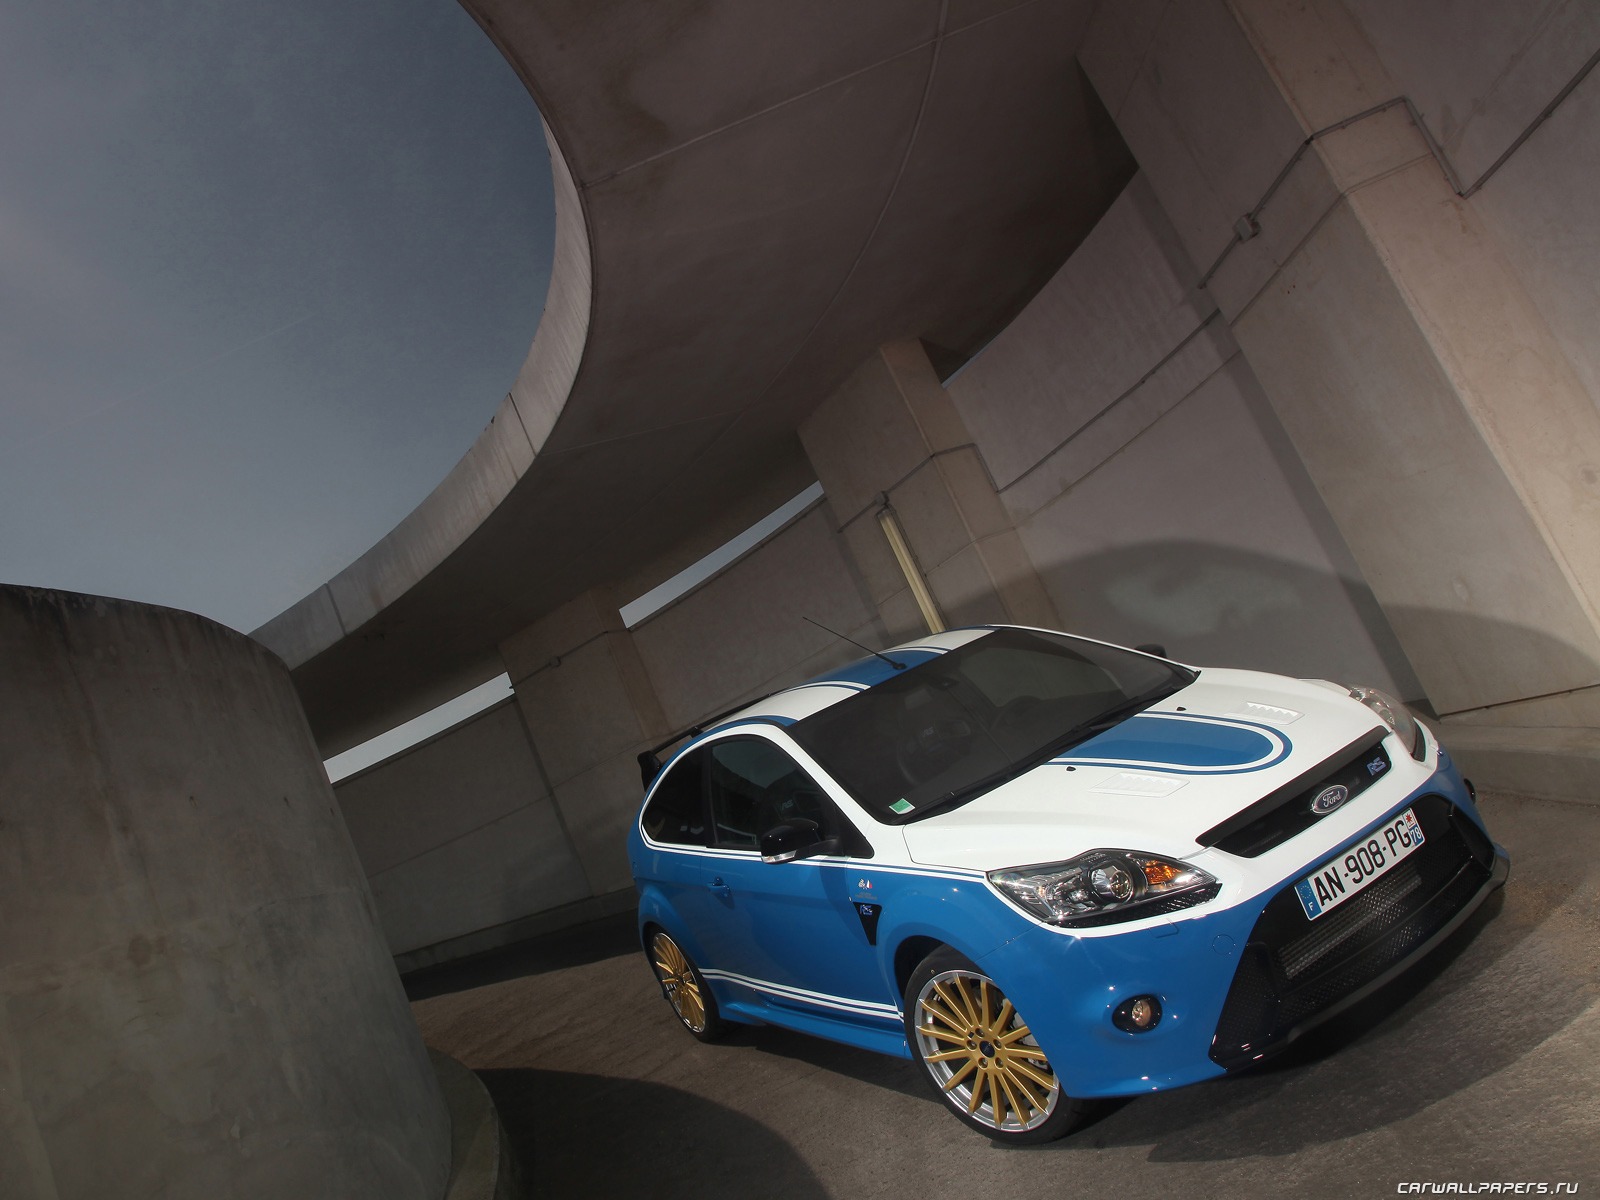 Ford Focus RS Le Mans Classic - 2010 福特4 - 1600x1200